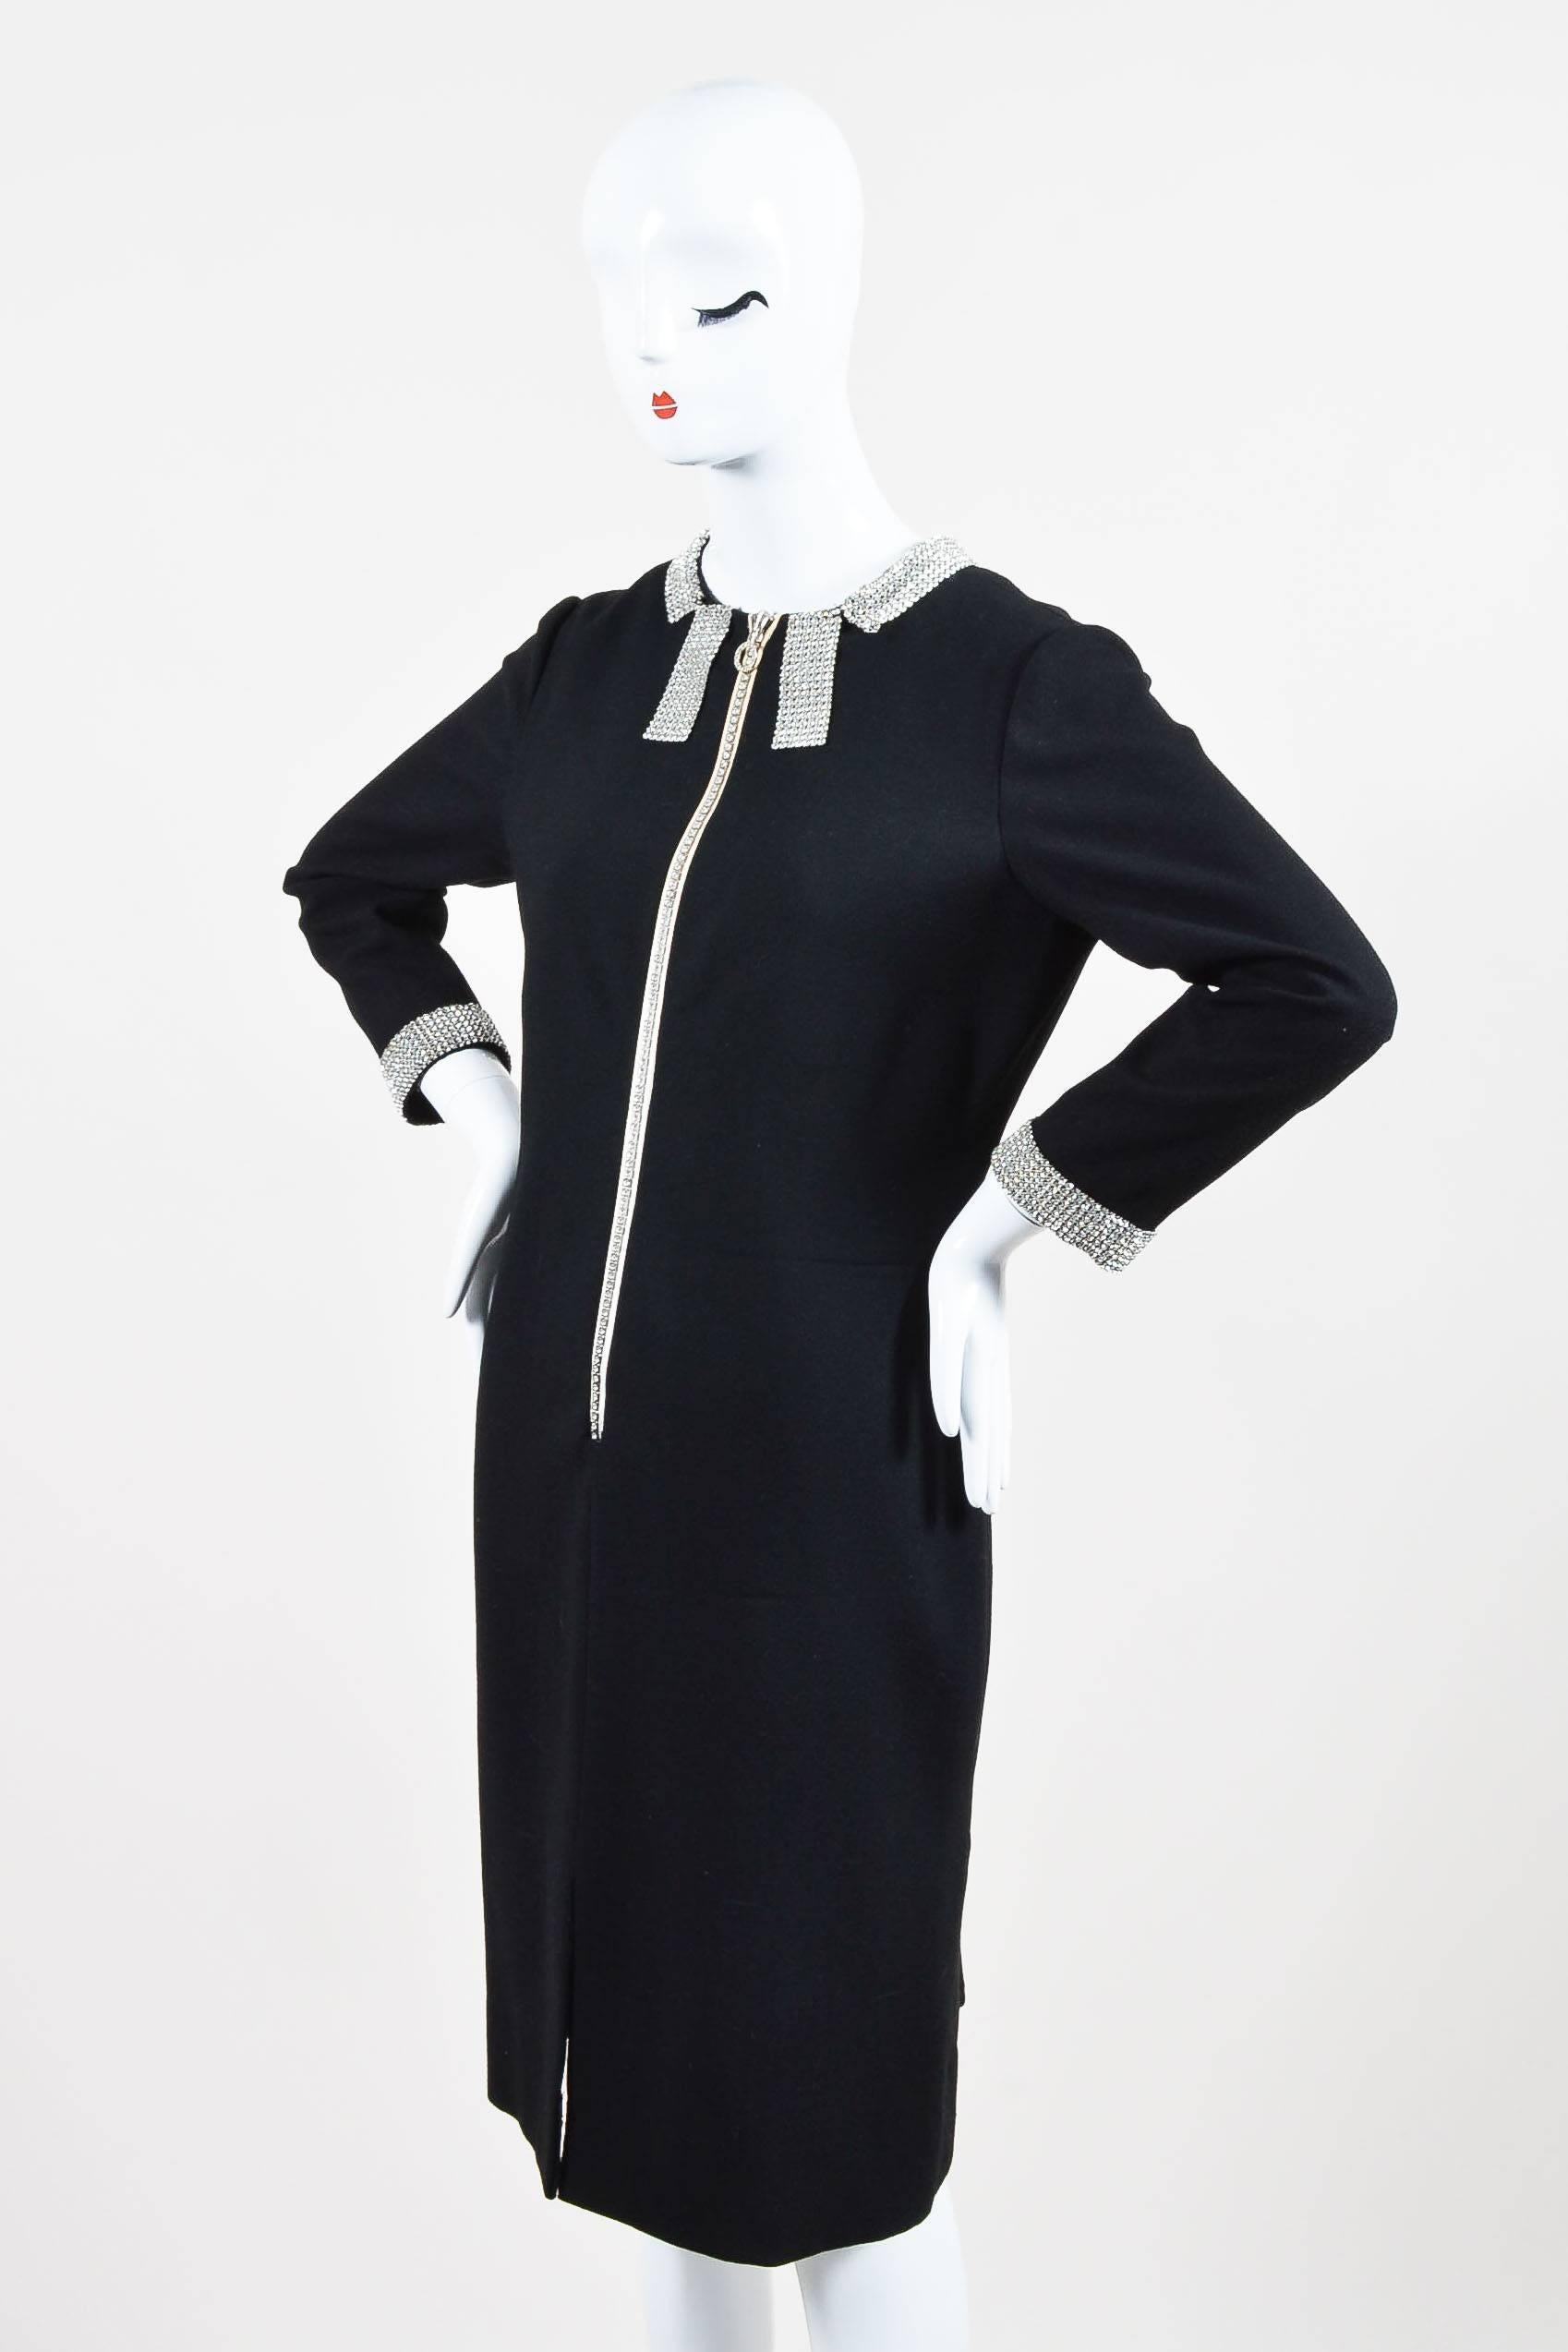 Elegant zip-up dress constructed of black crepe features sparkling rhinestone embellishment at collar, zipper, and sleeve cuffs. 3/4 length sleeves. Straight silhouette. Rounded neckline. Lined.

Additional measurements: Sleeve Length 20.25